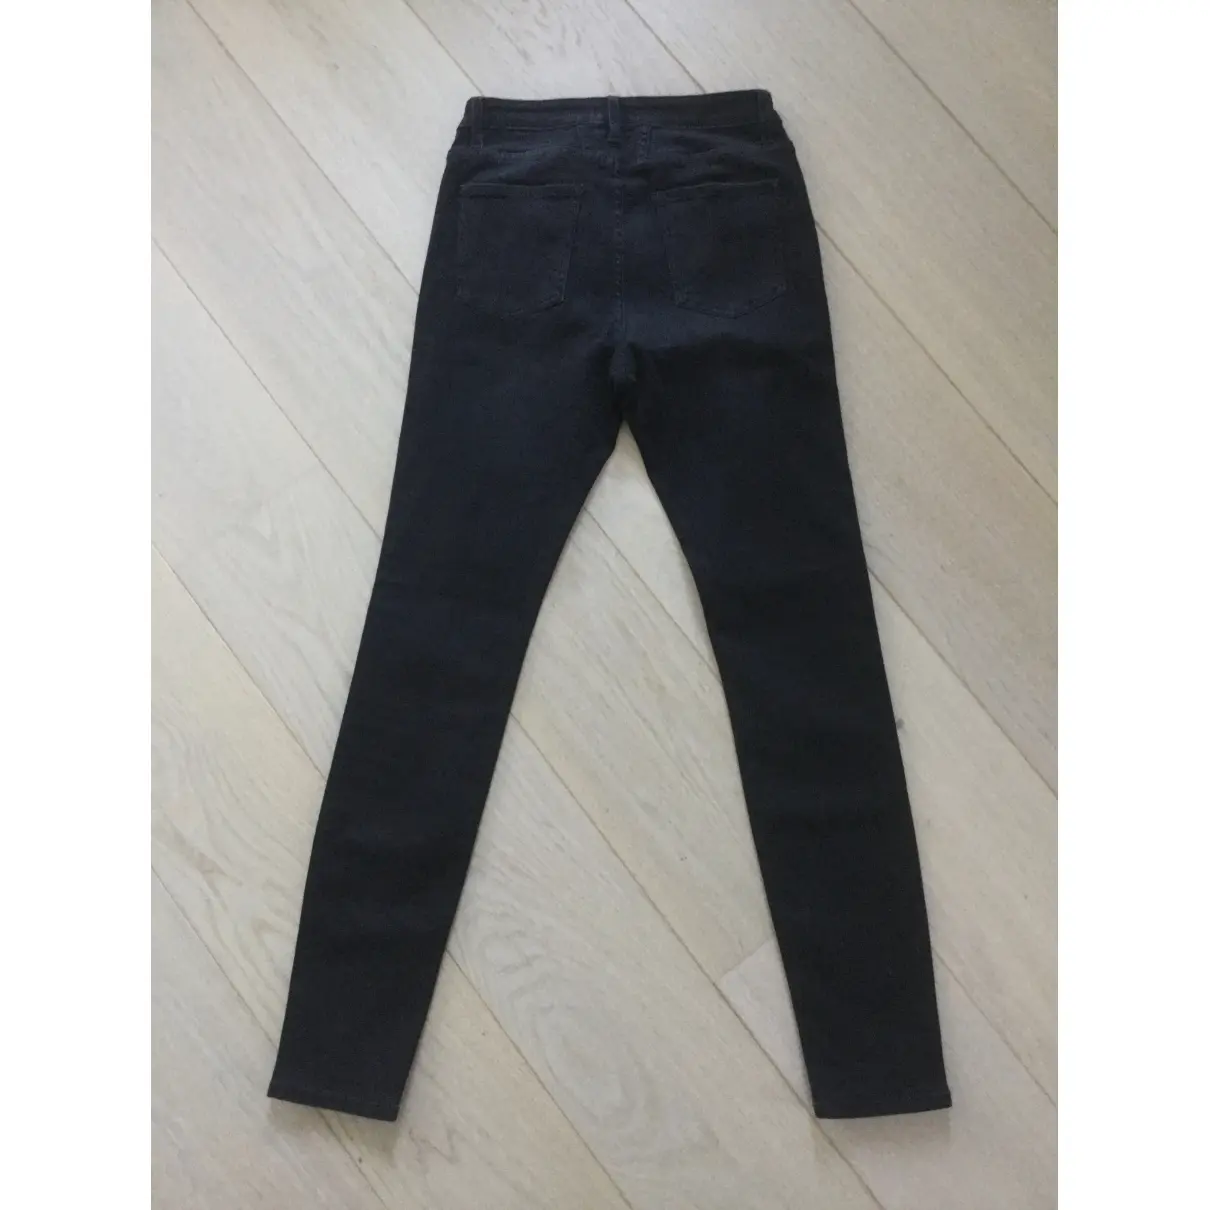 Closed Slim jeans for sale